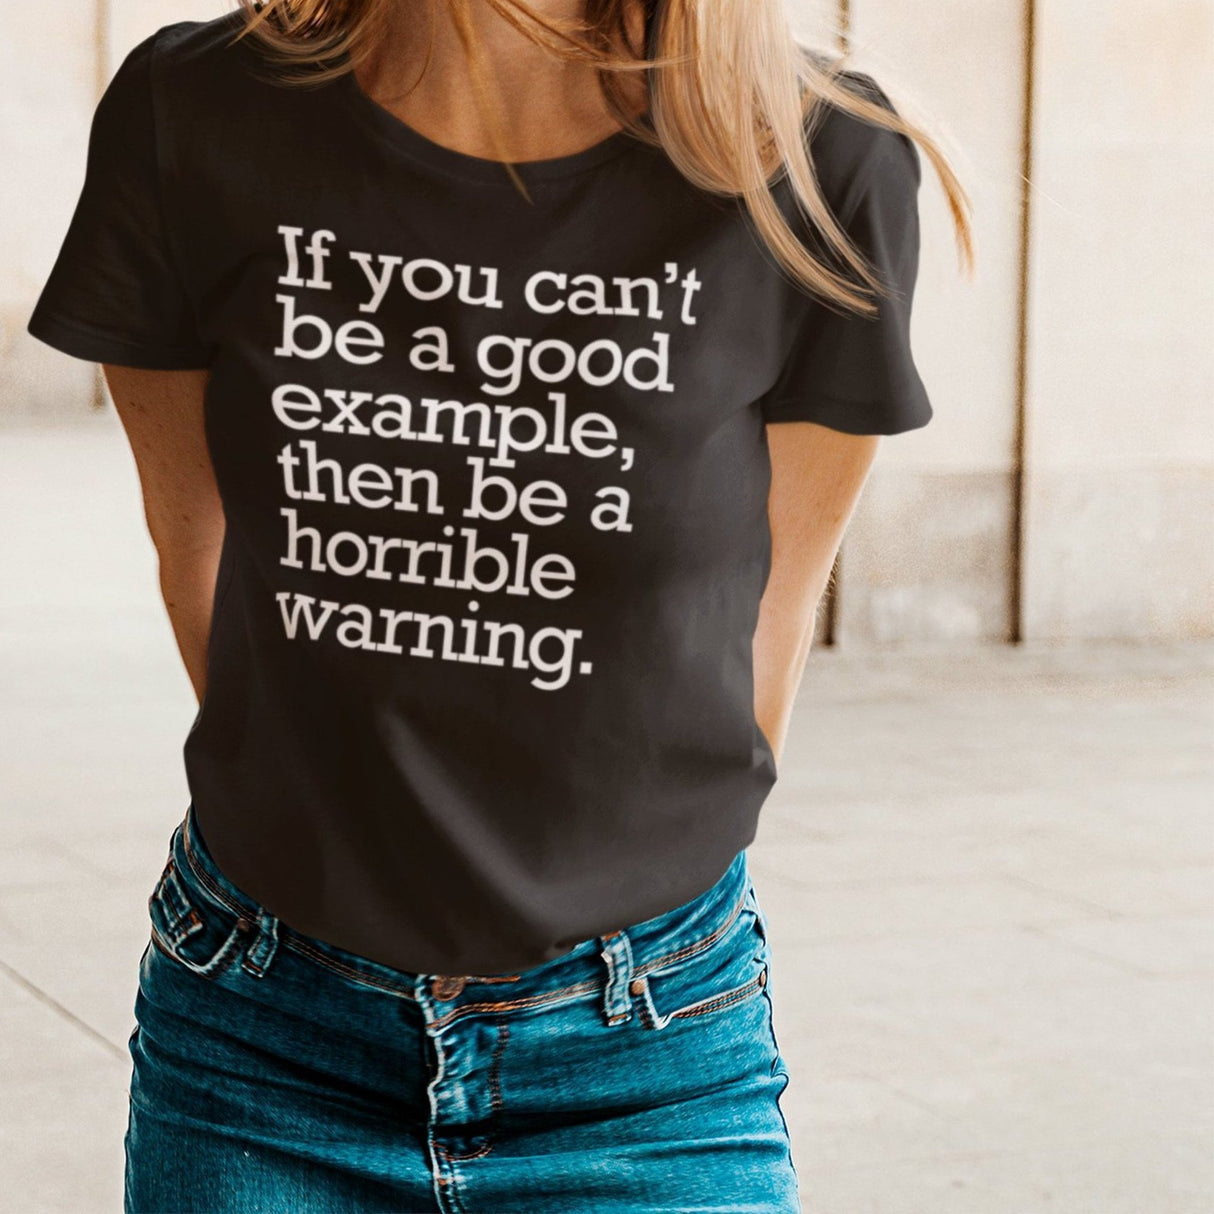 if-you-cant-be-a-good-example-then-be-a-horrible-warning-good-tee-example-t-shirt-vibes-tee-t-shirt-tee#color_black